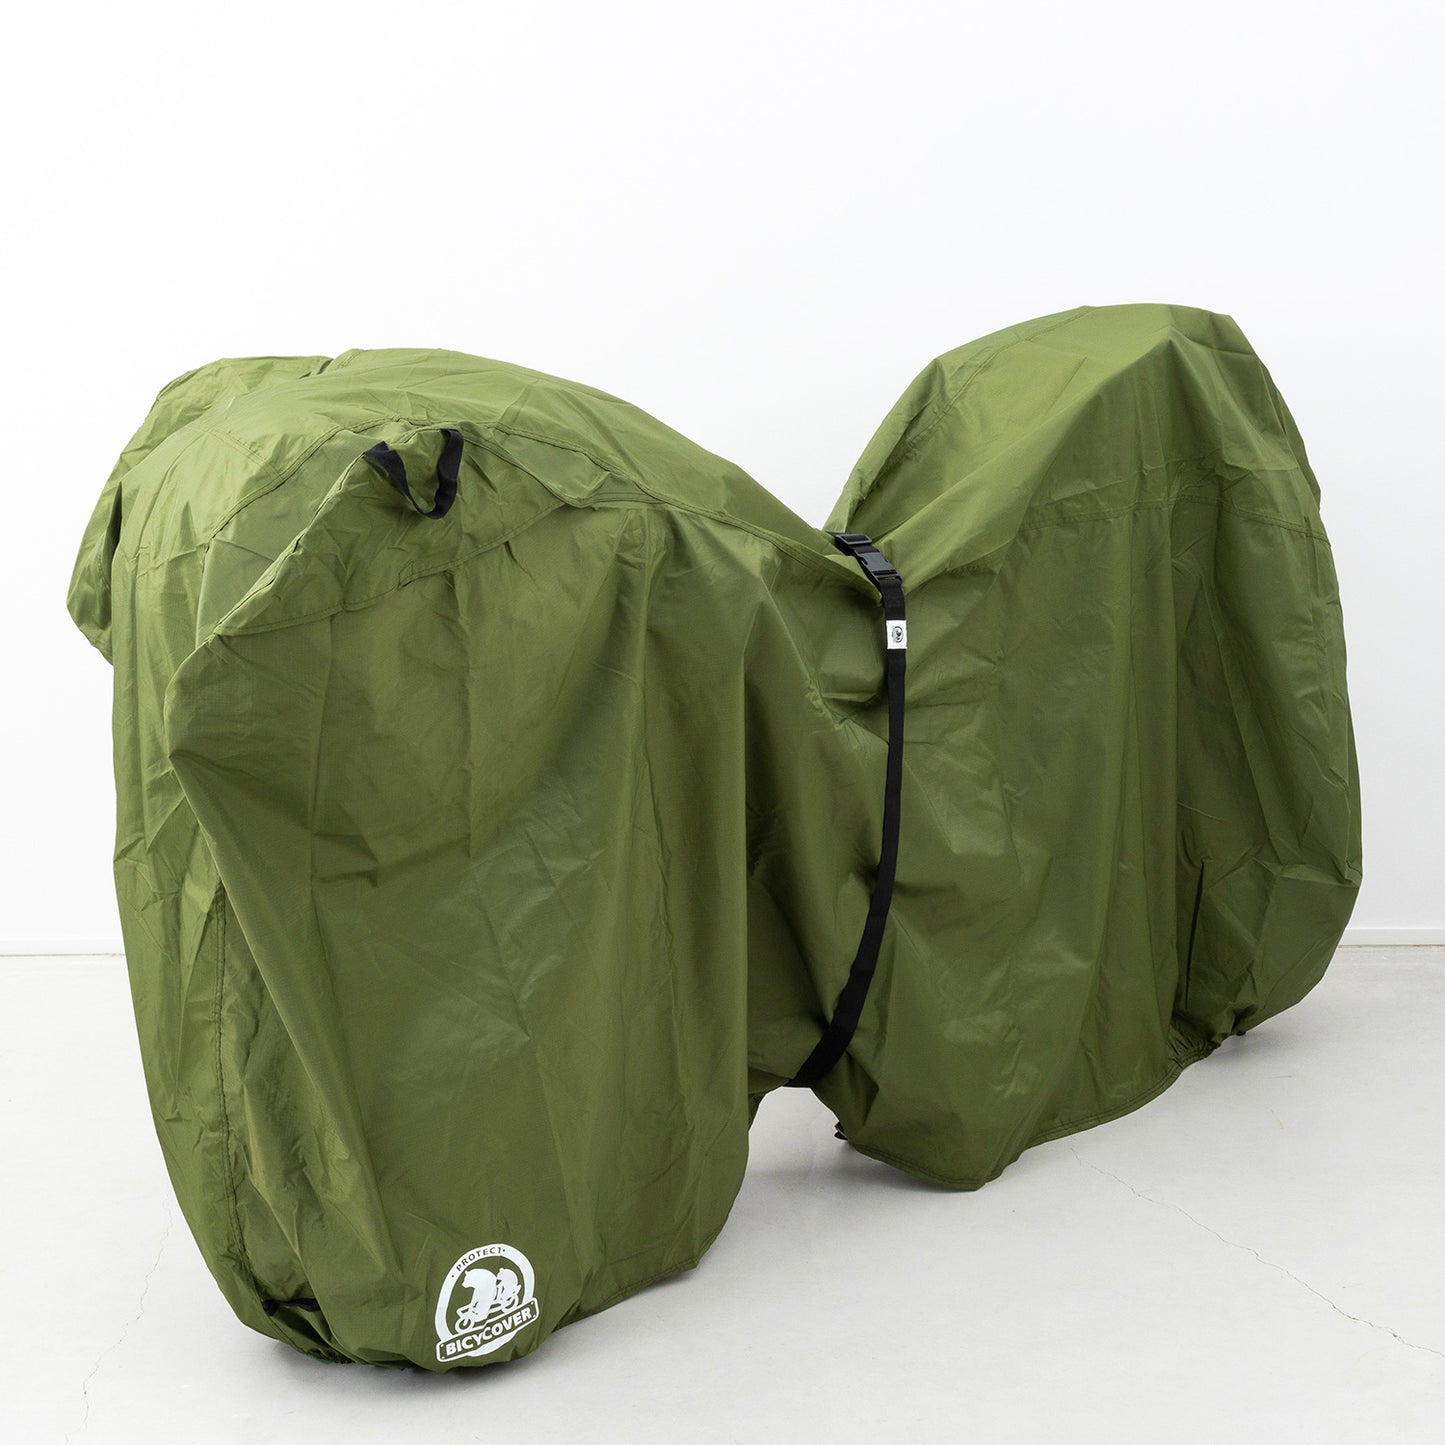 BICYCOVER high-spec cycle cover children's bicycle size